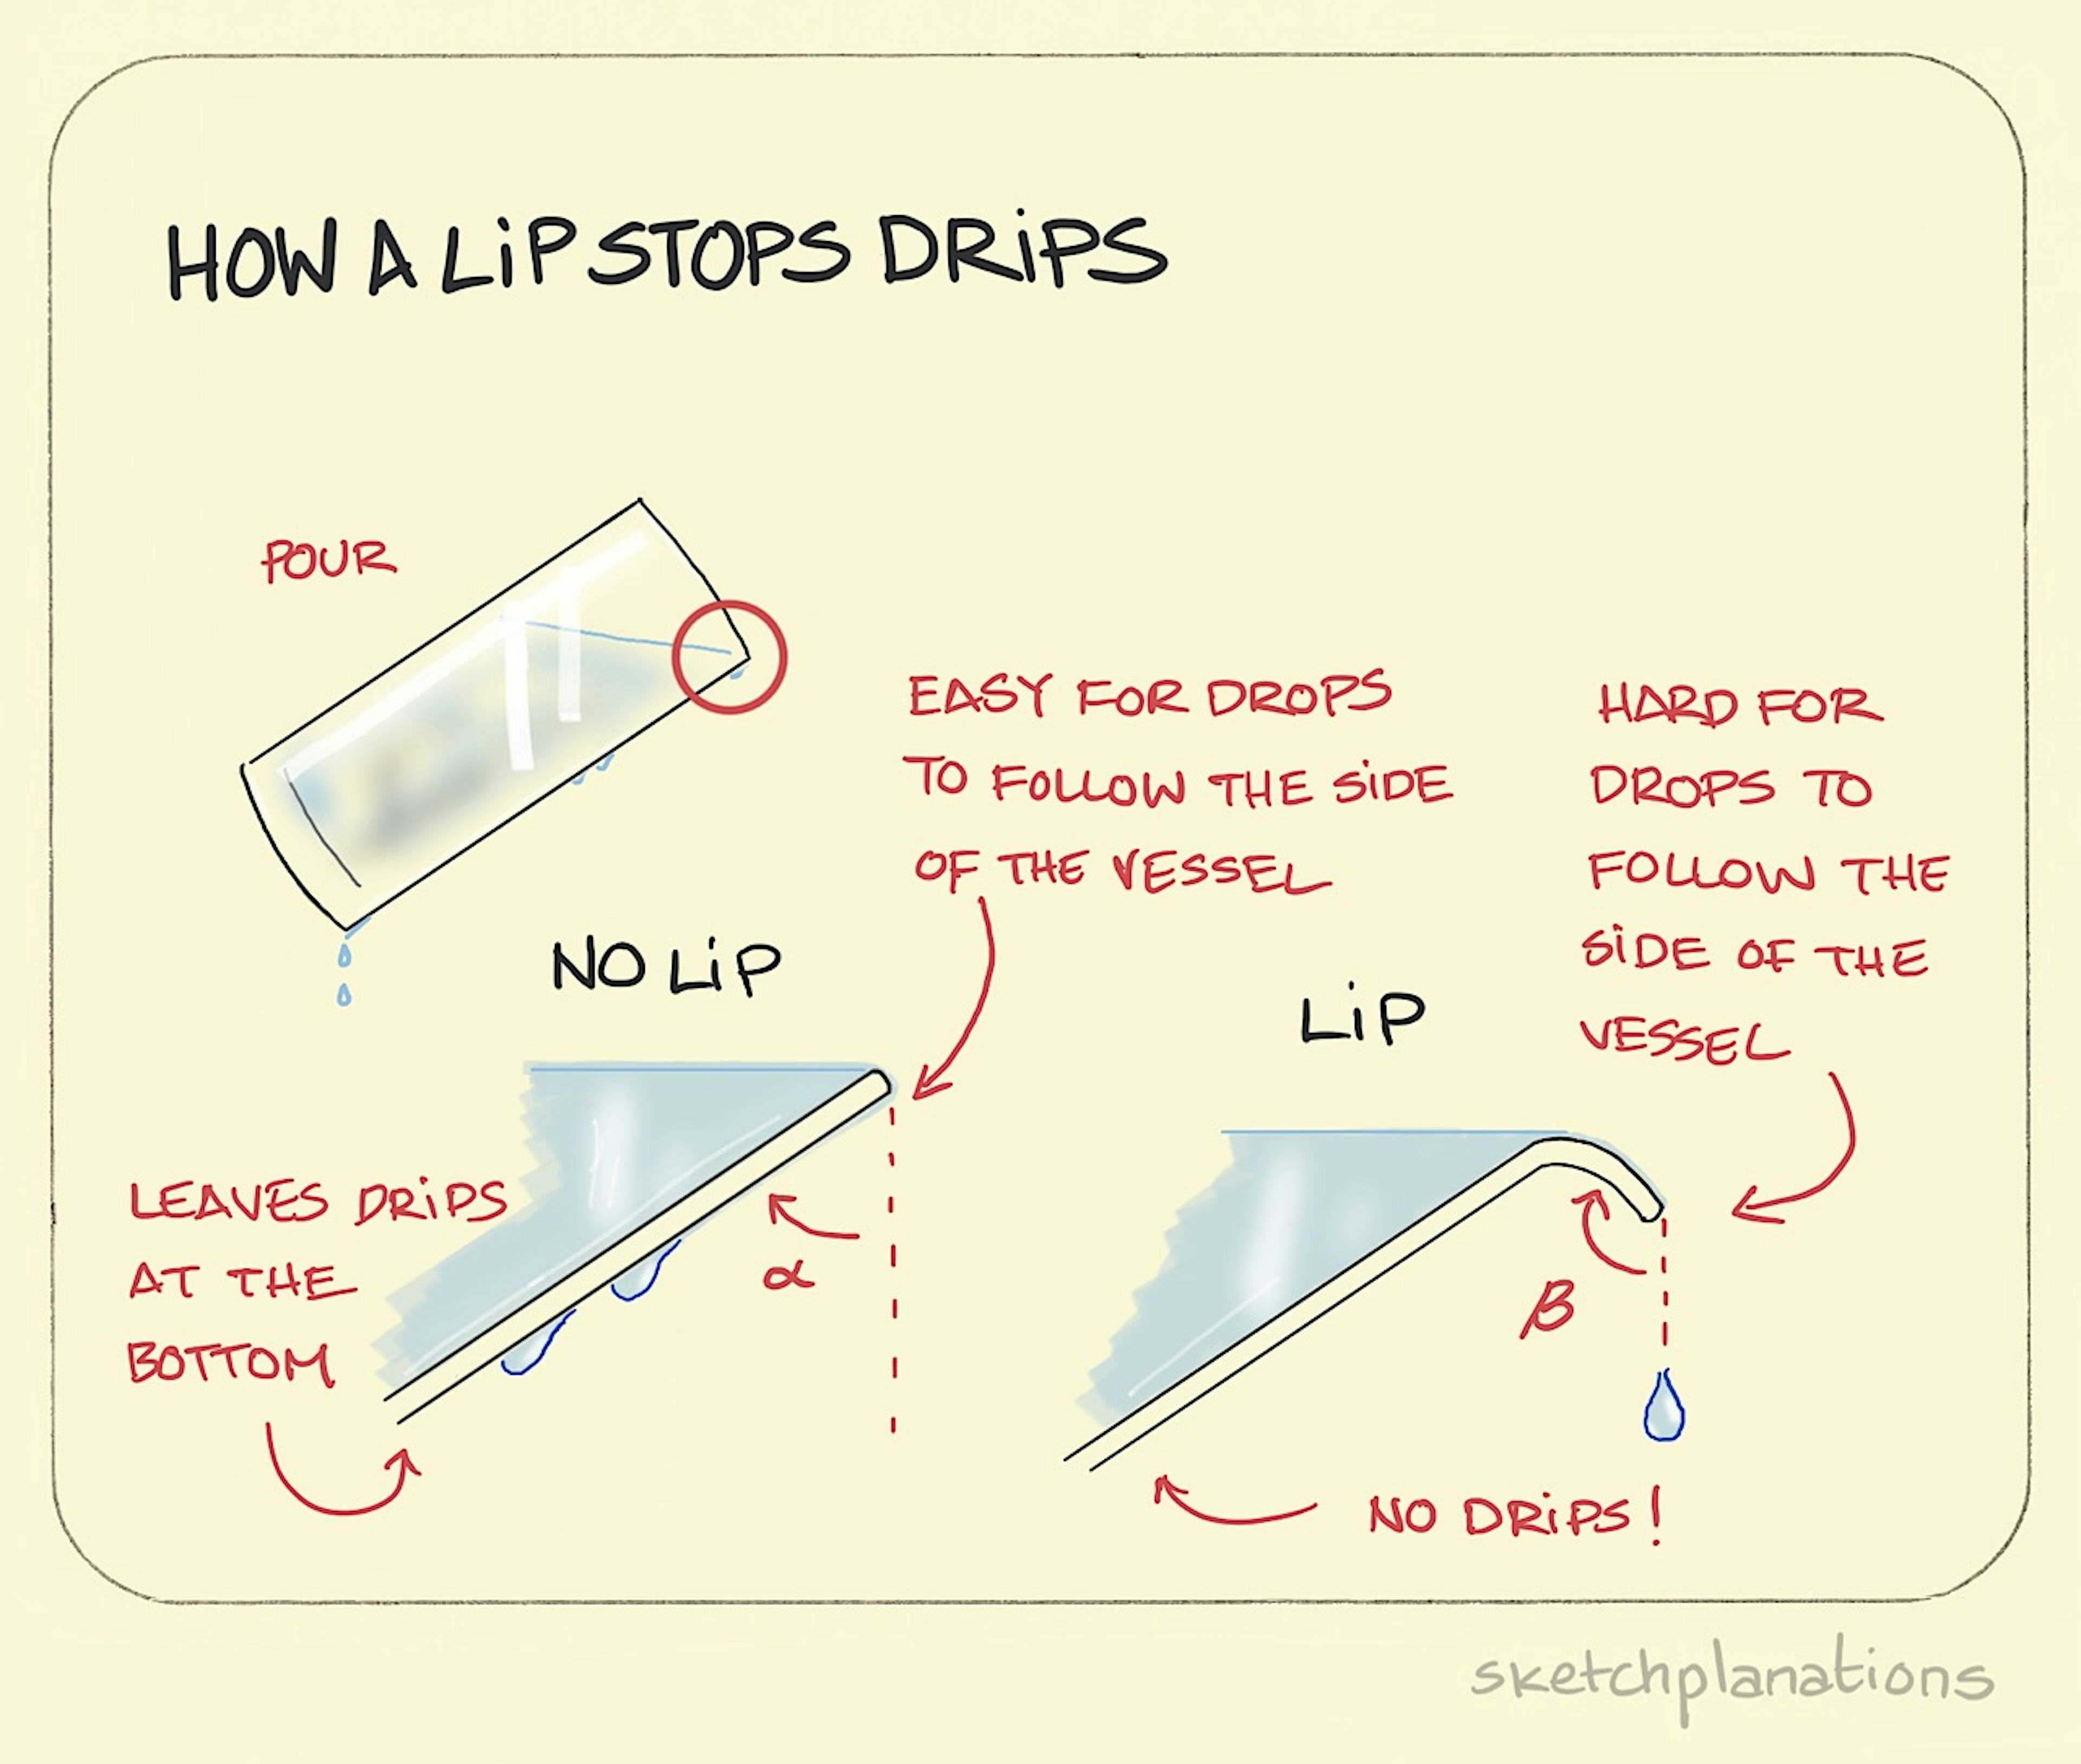 How a lip stops drips illustration: a glass of water is tipped up to pour out its contents. Close-ups of the mouth of the glass show how without a lip, water trickles down the side of the glass and that with a lip the side of the glass stays dry. 